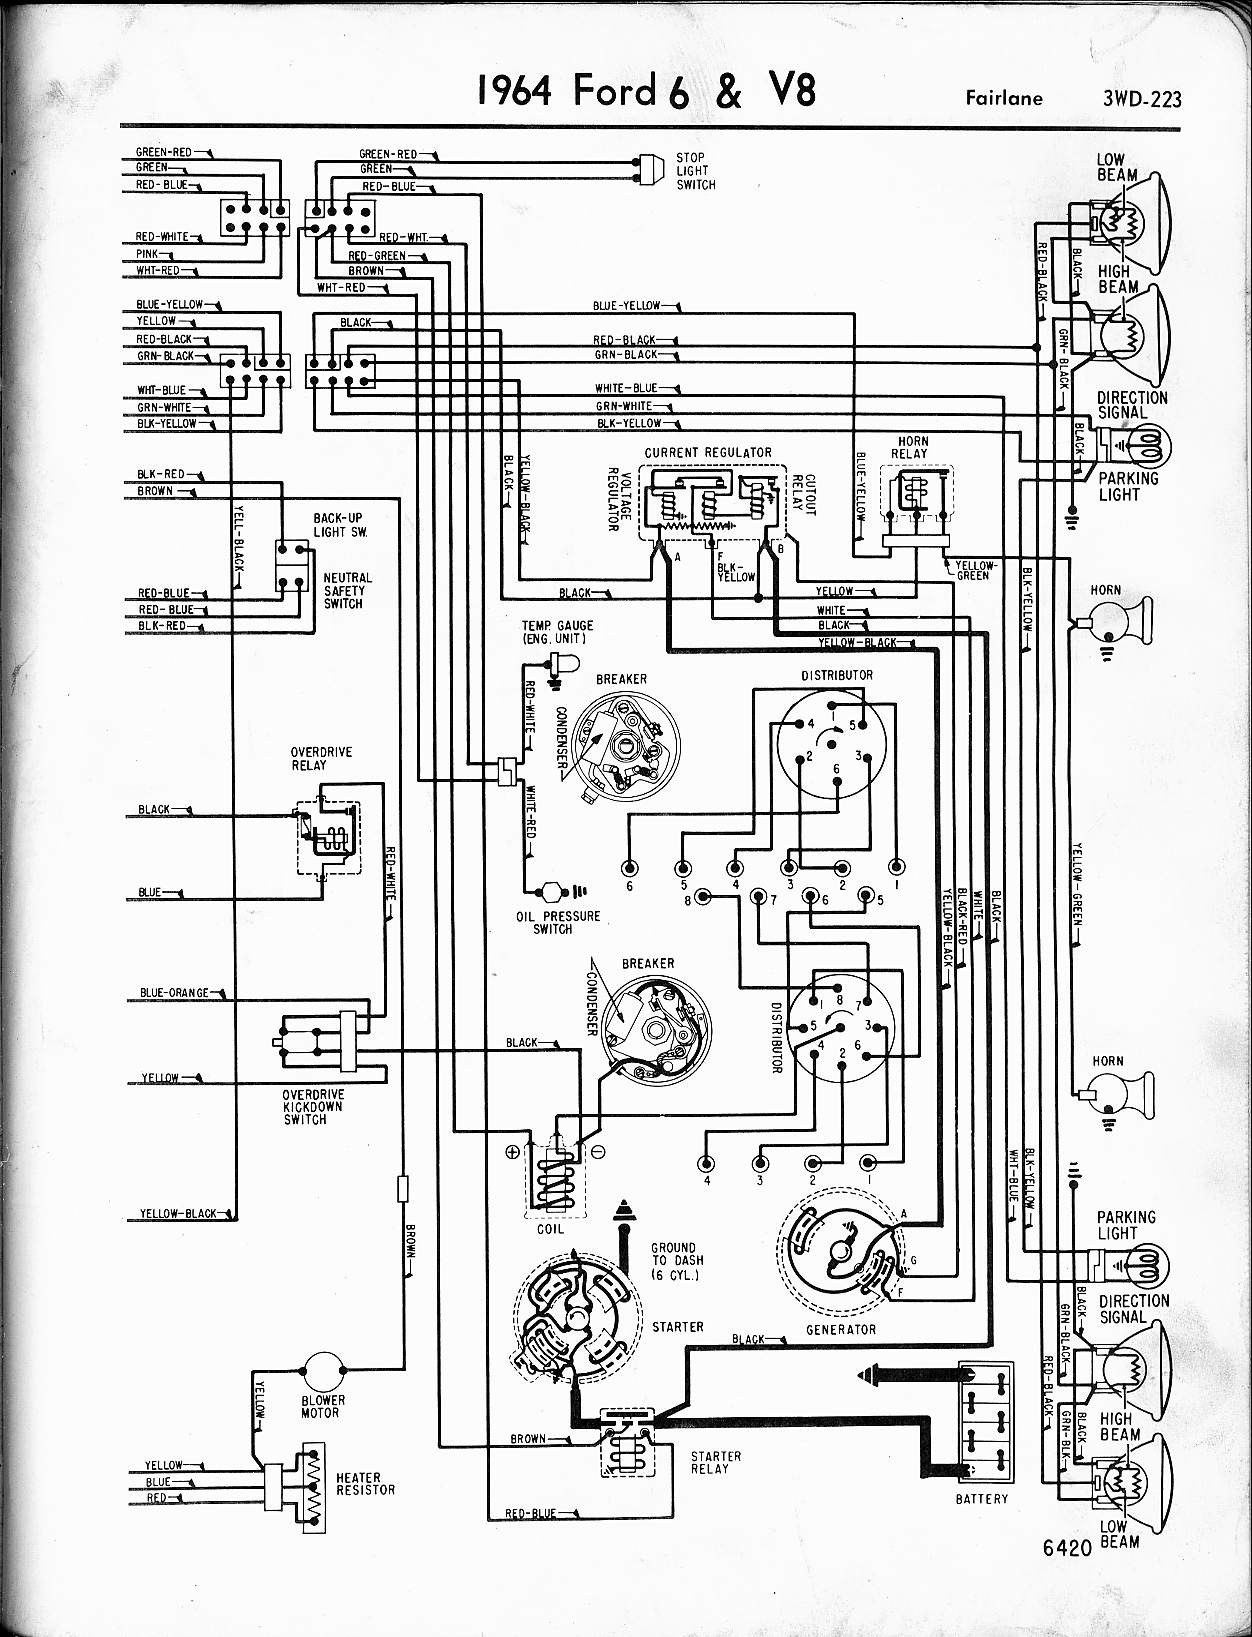 57 65 ford wiring diagrams 1964 thunderbird wiring diagram acessories 1964 6 & v8 fairlane